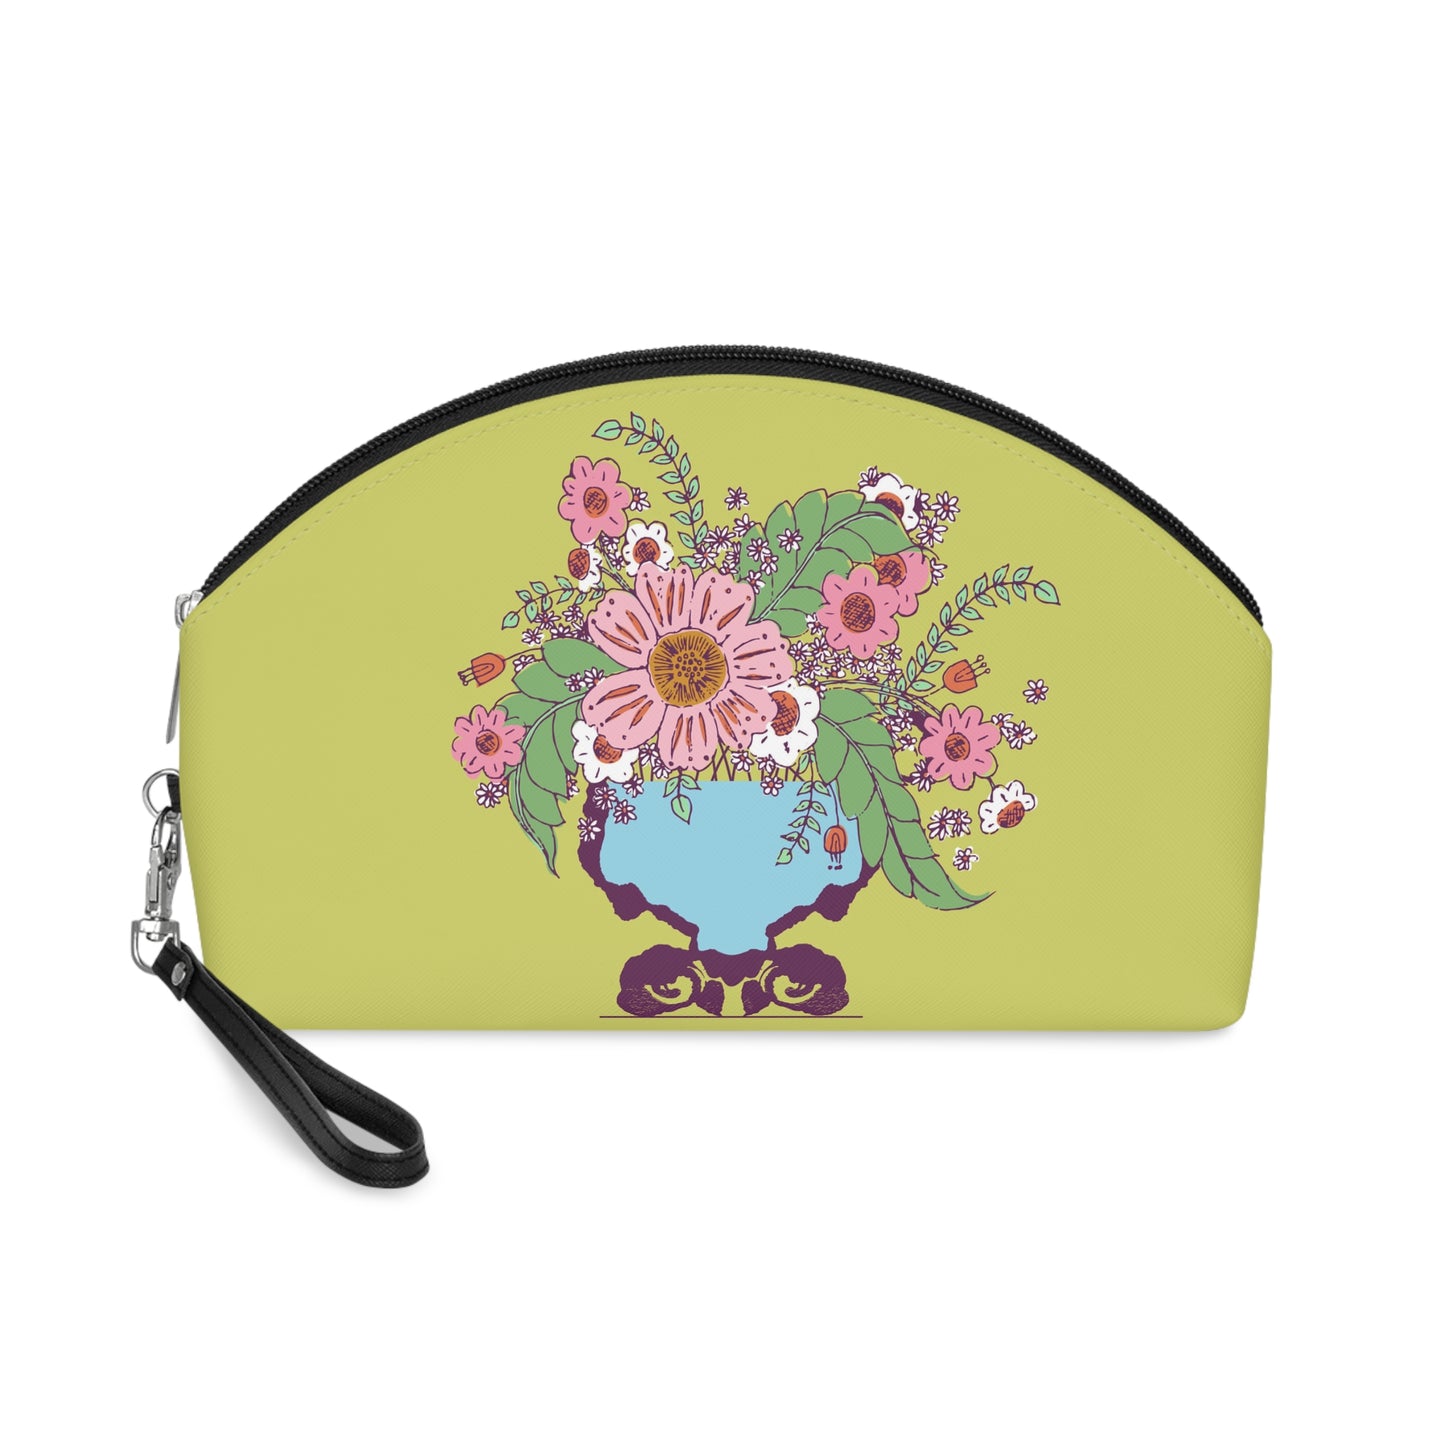 Cheerful Watercolor Flowers in Vase on Bright Green Makeup Bag